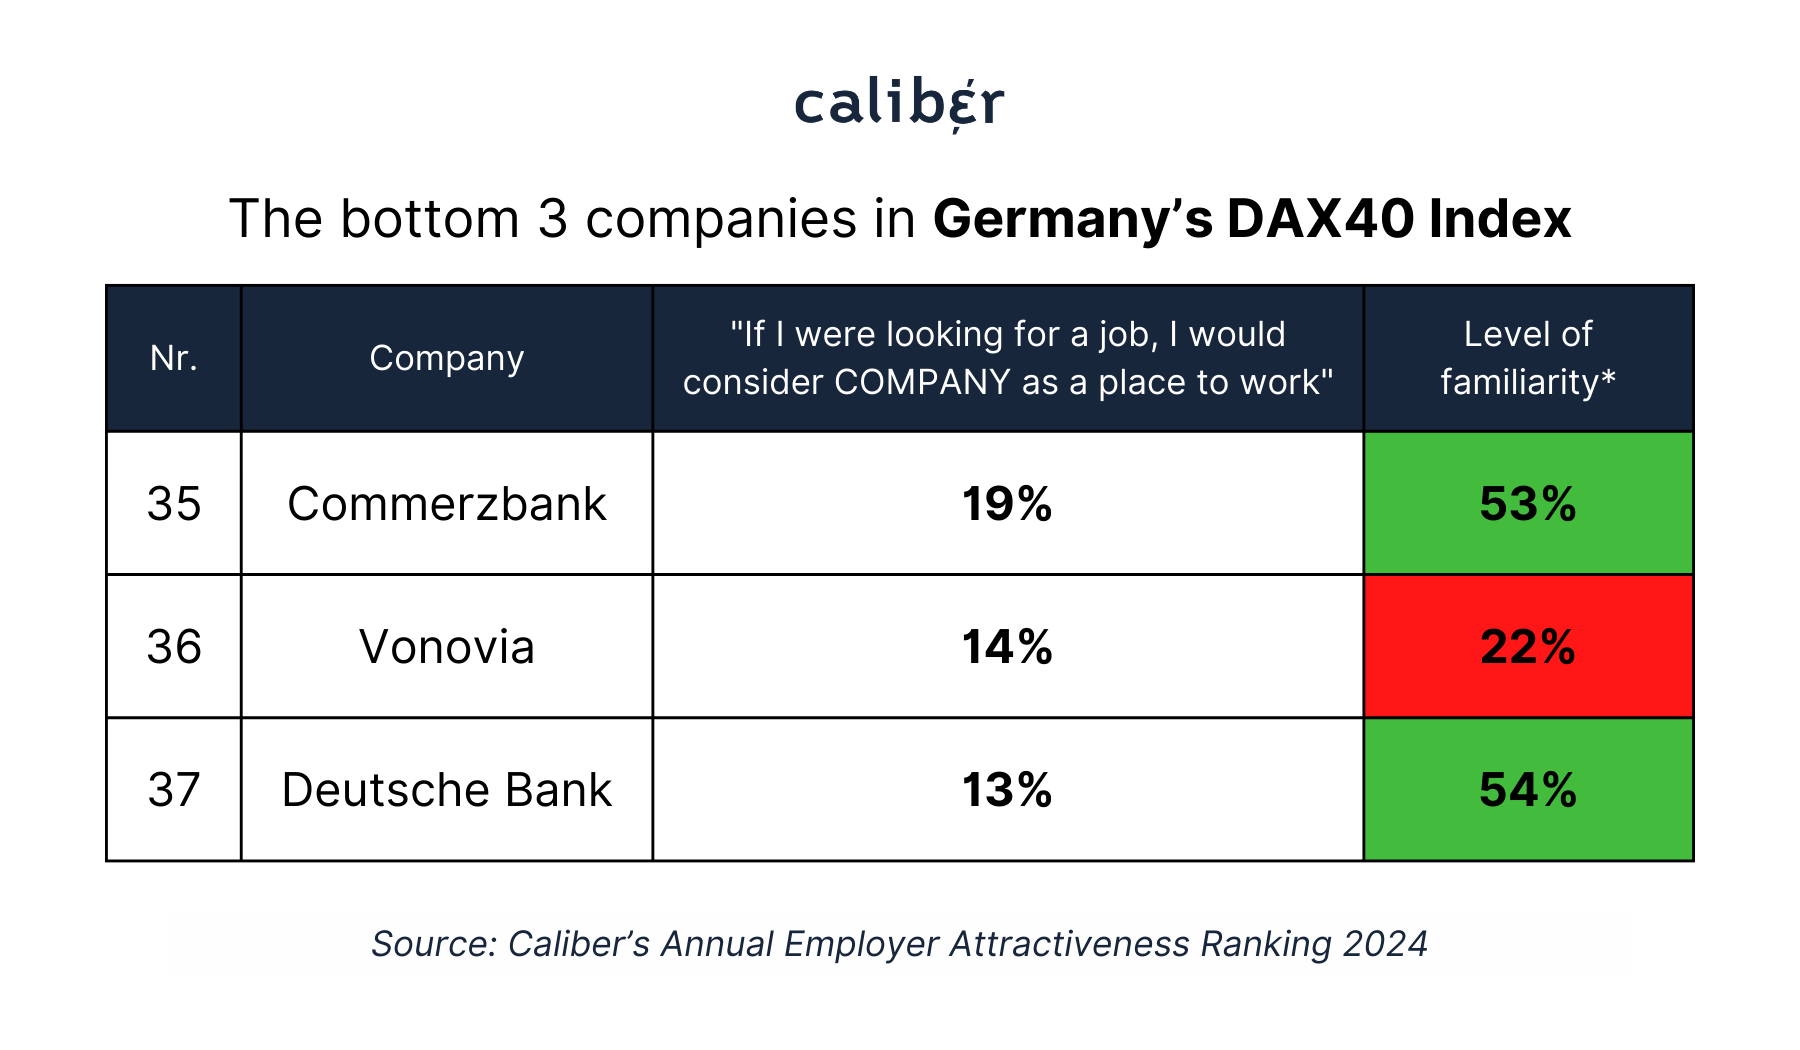 The bottom 3 companies in Germany DAX40 Index